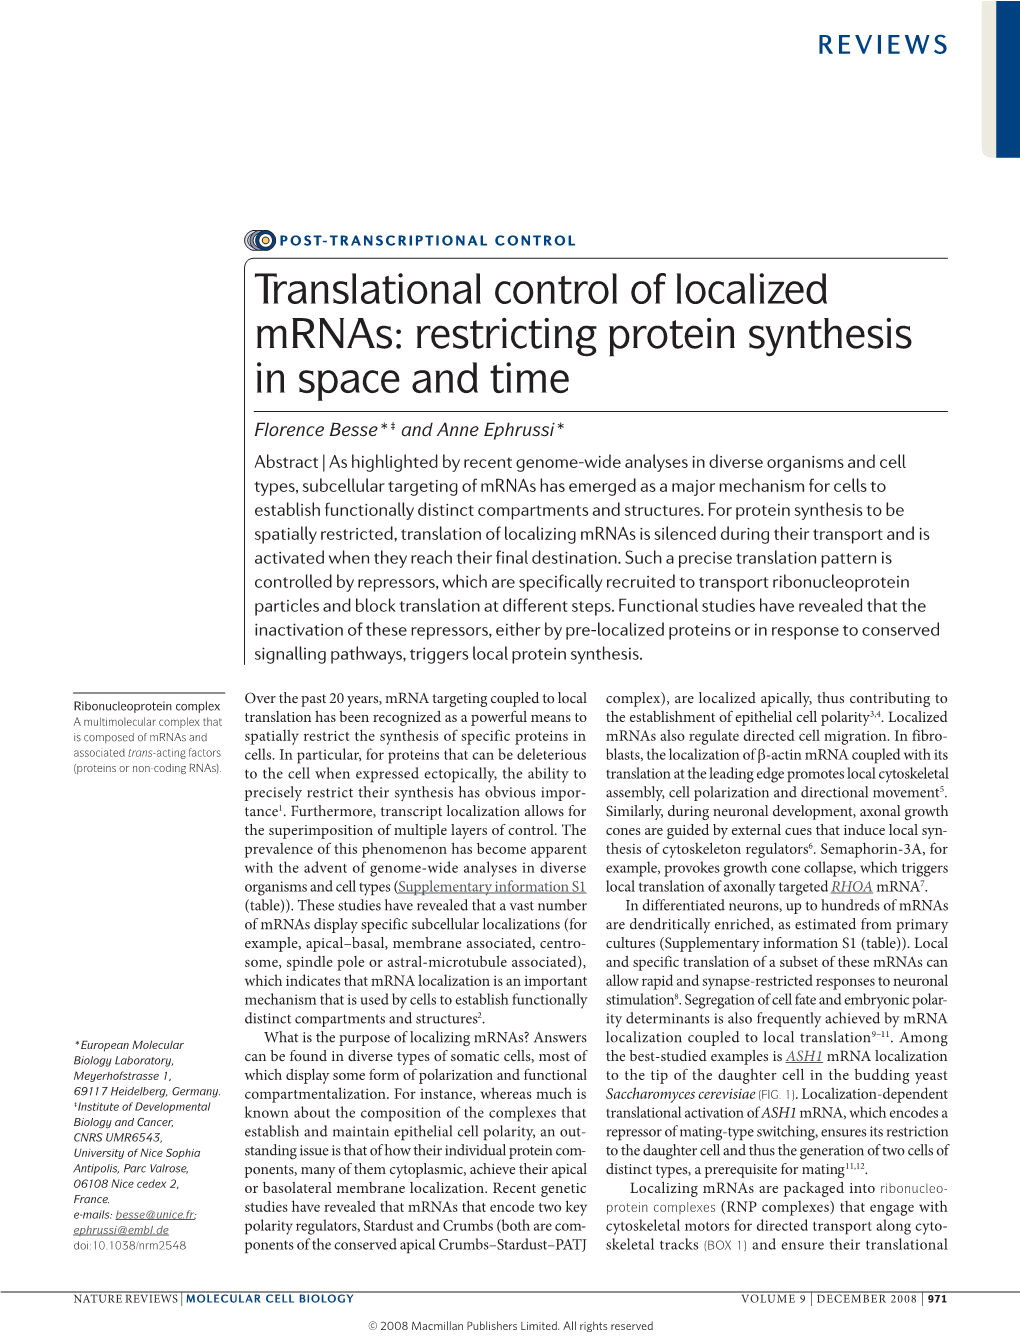 Translational Control of Localized Mrnas: Restricting Protein Synthesis in Space and Time